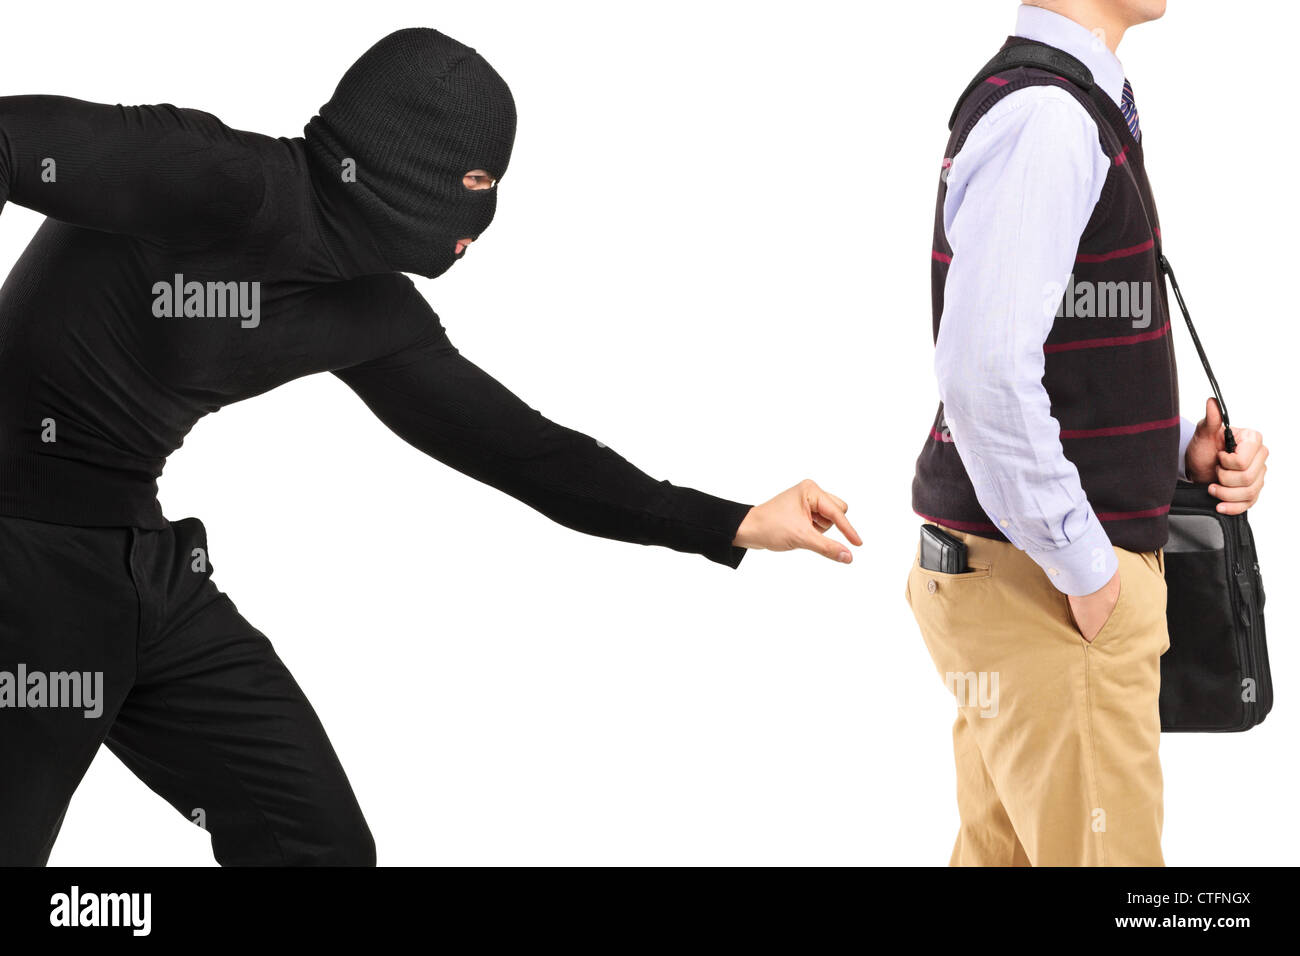 Pickpocket trying to steal a wallet Stock Photo